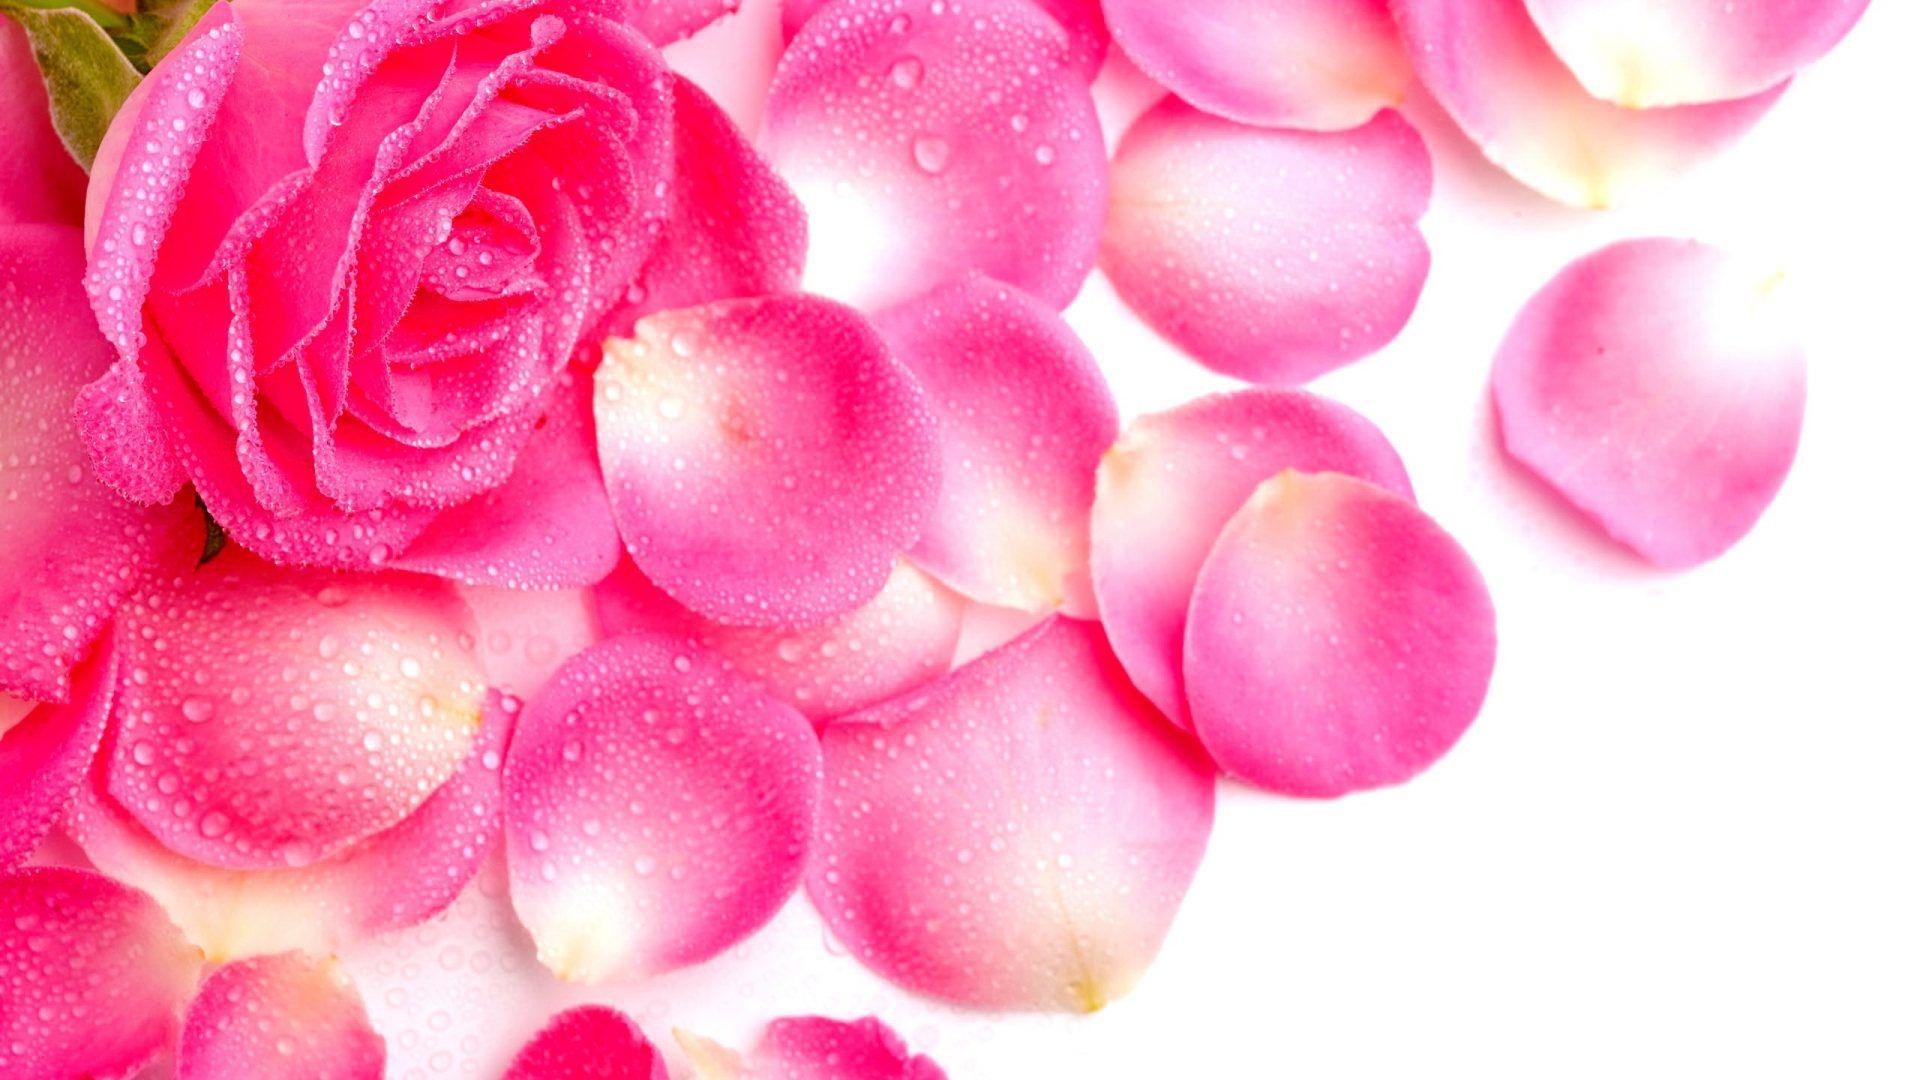 Waterdrops Tag wallpaper: Roses Loveliness Flowers Waterdrops Soft